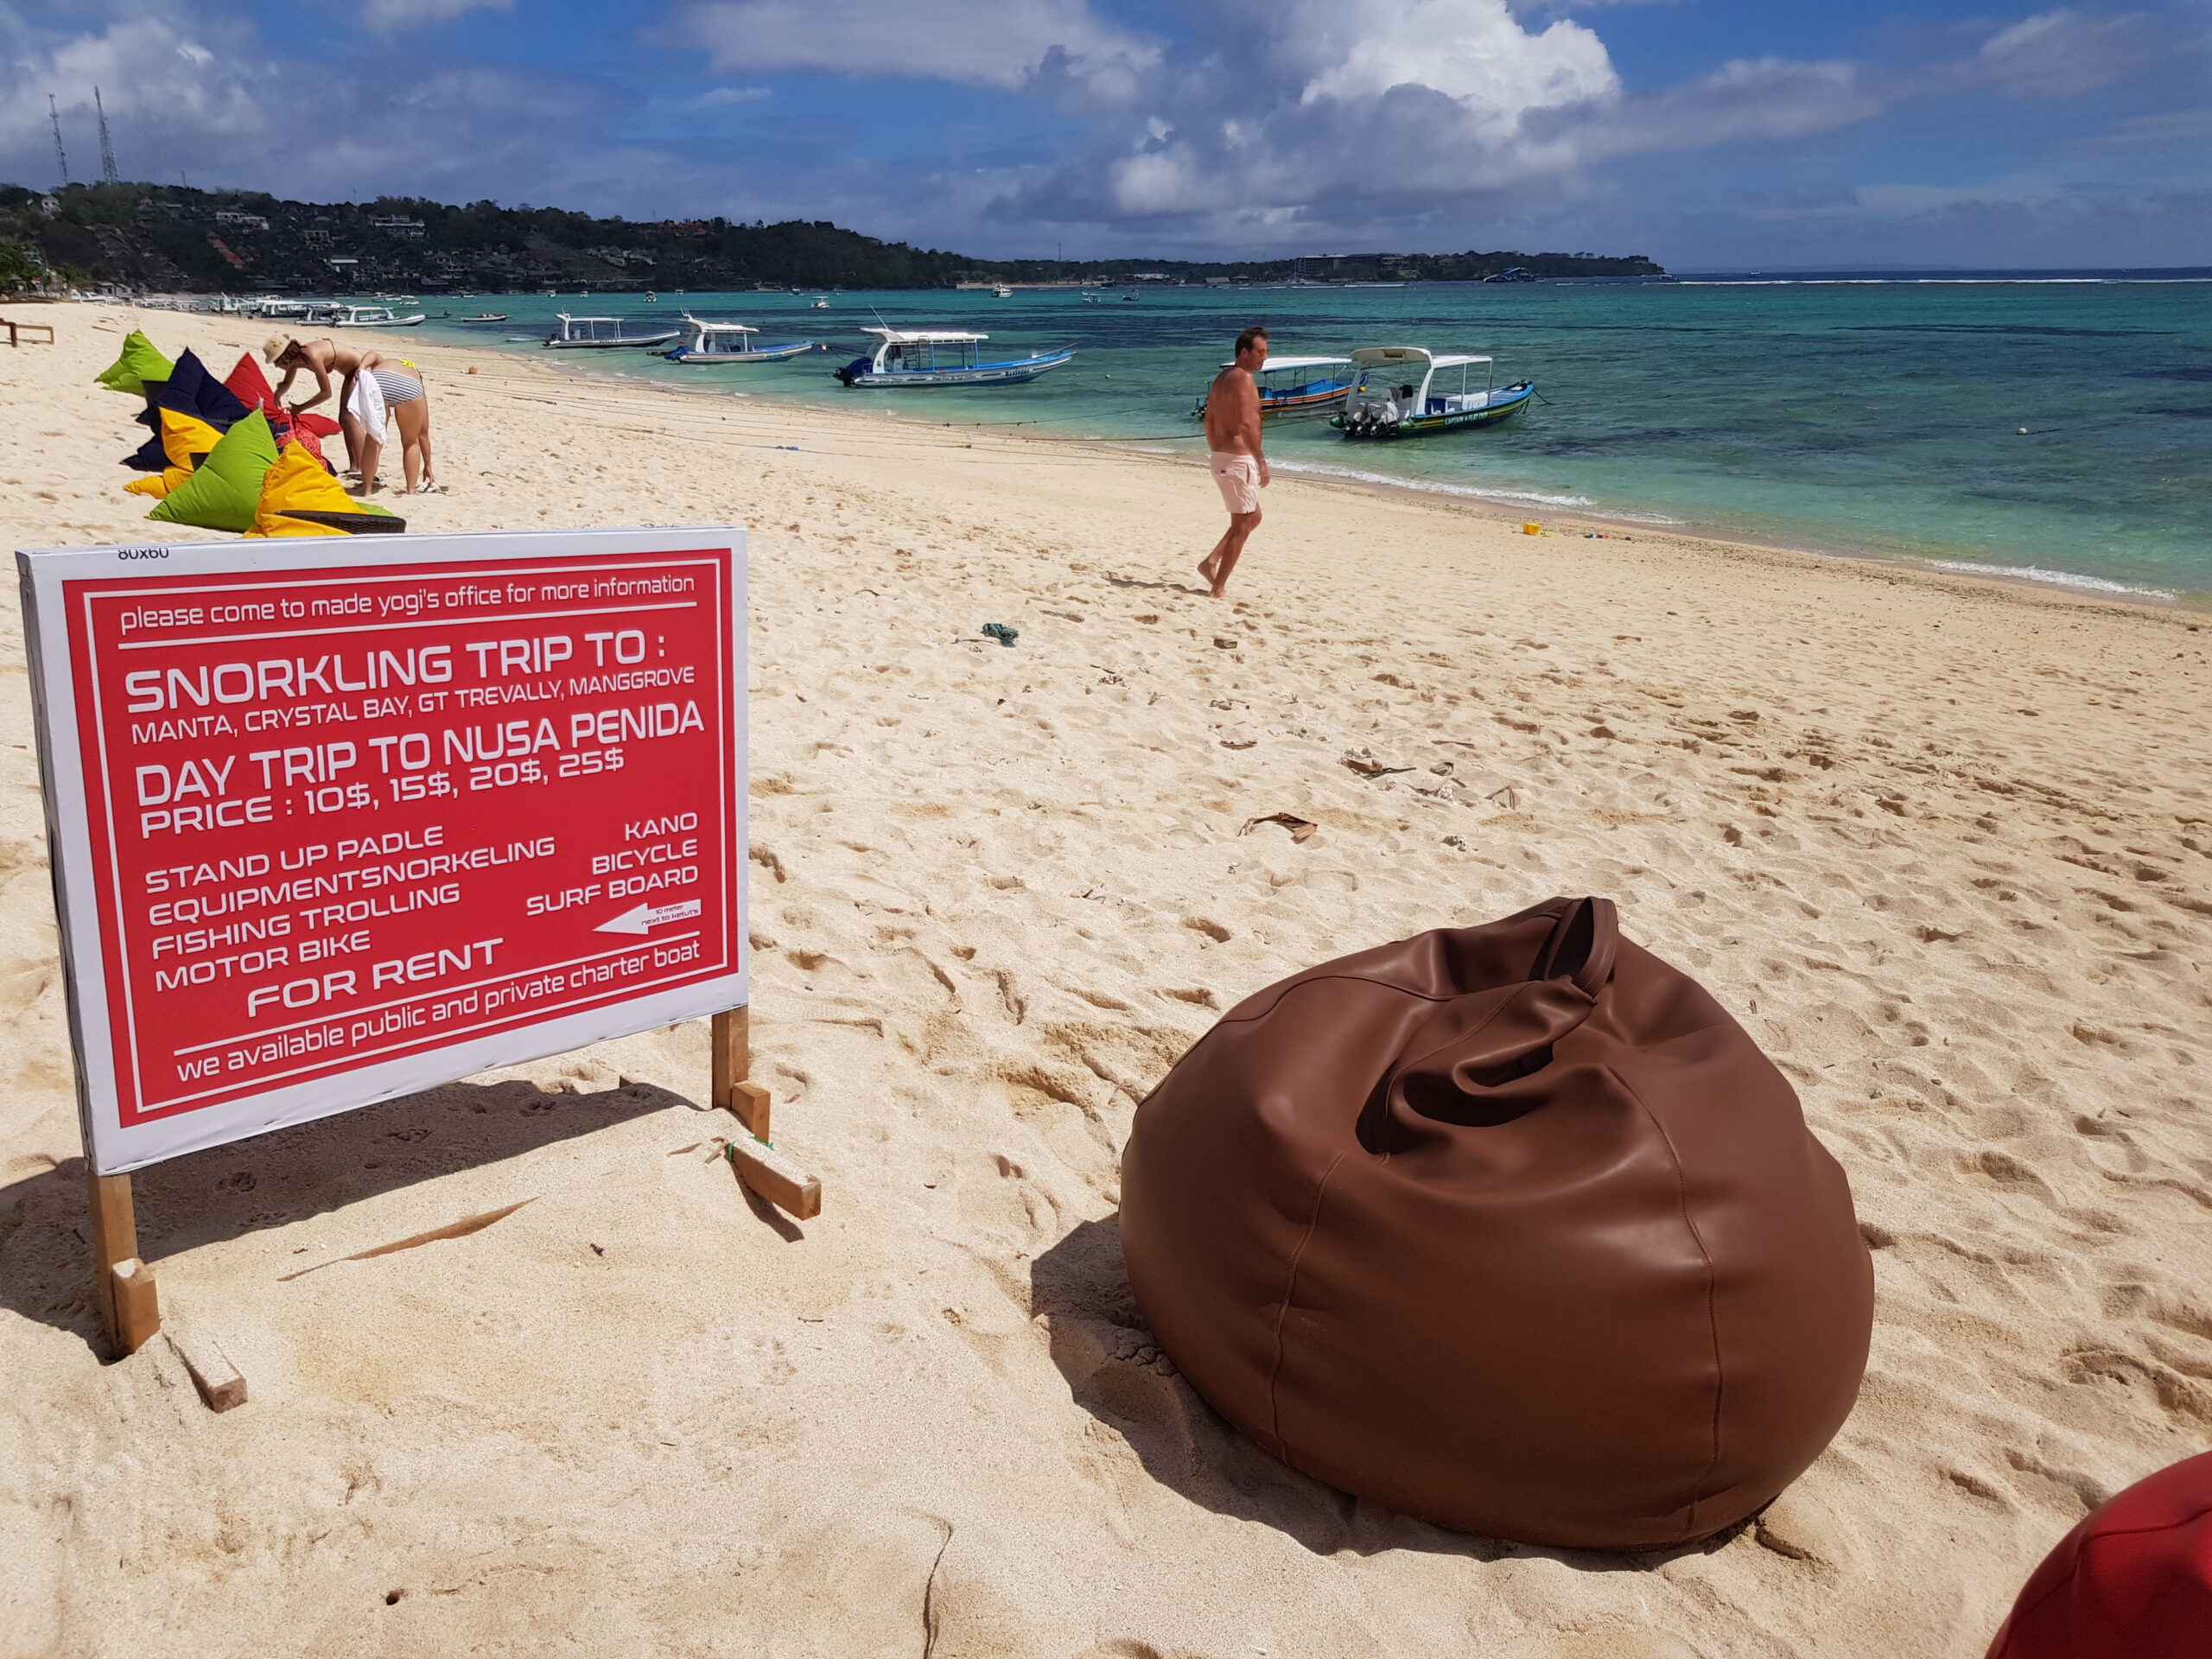 An snorkling advertising sign on the beach